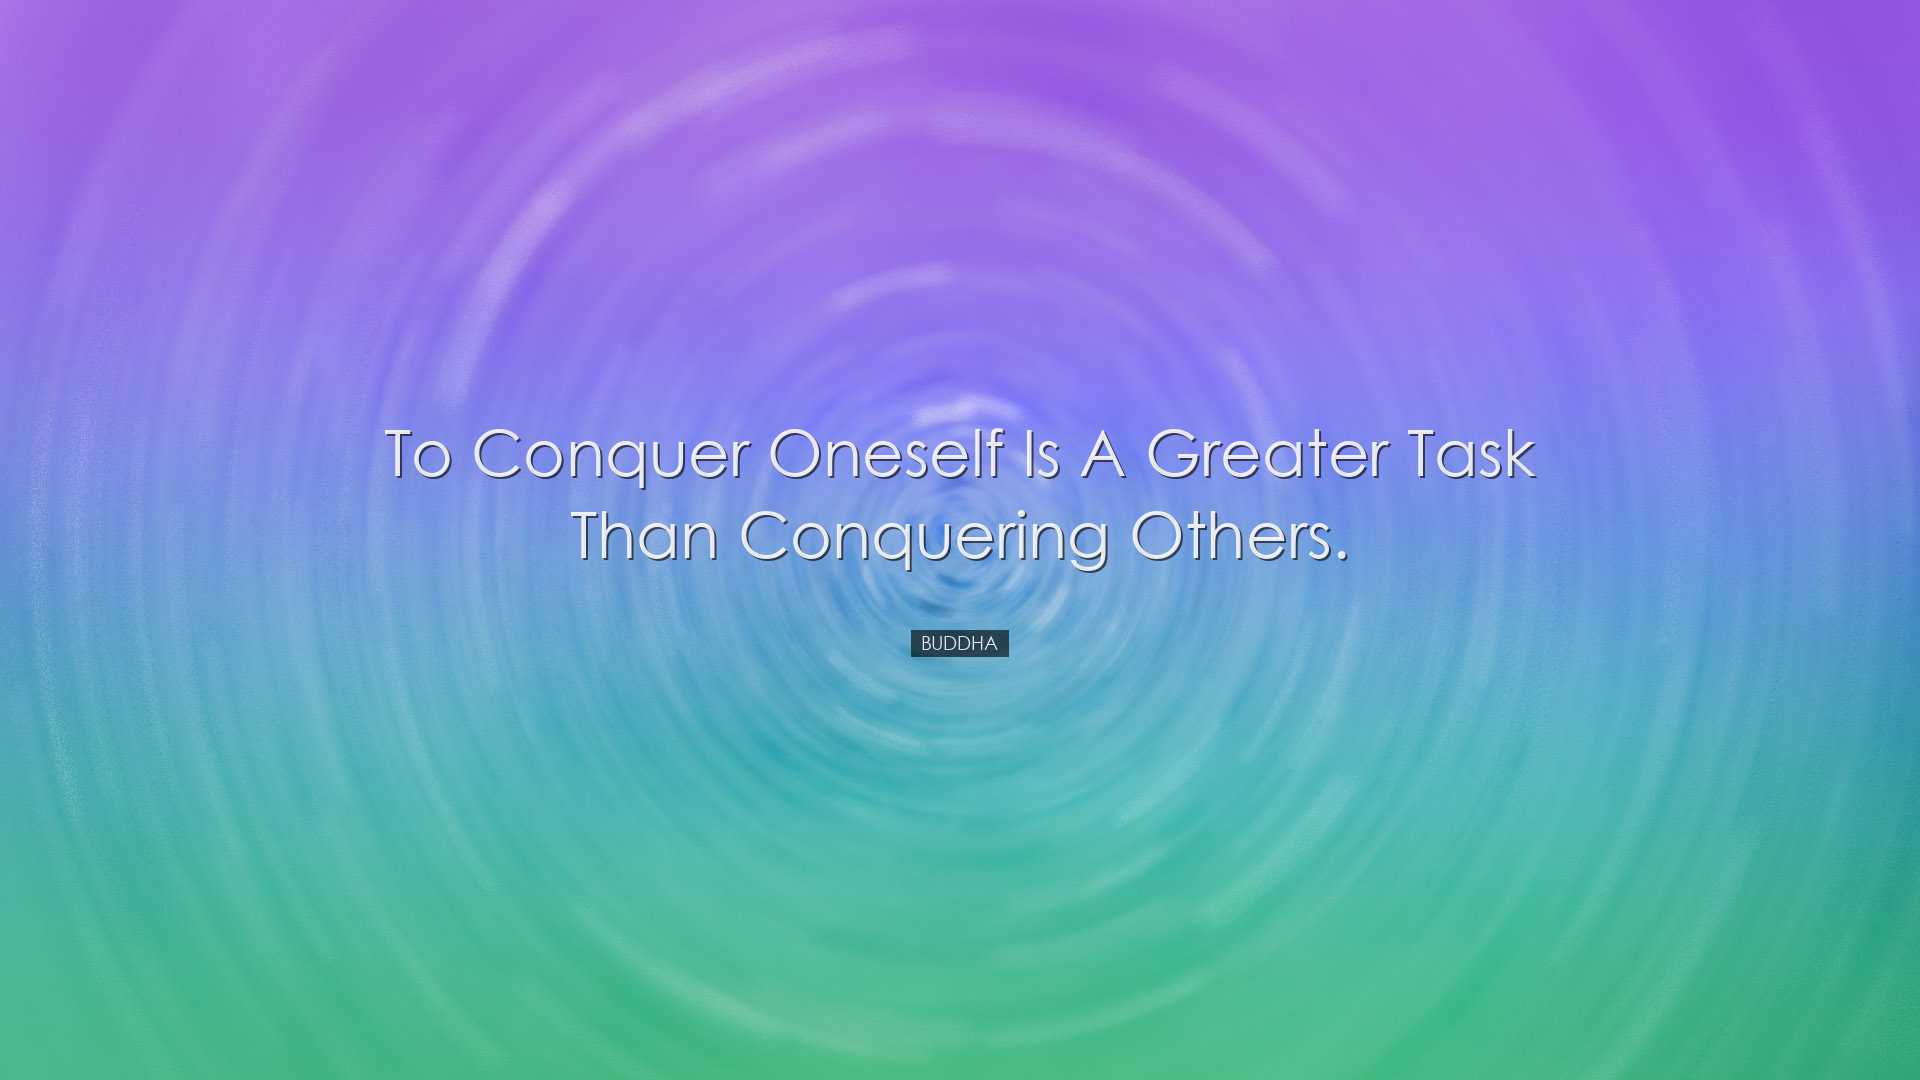 To conquer oneself is a greater task than conquering others. - Bud